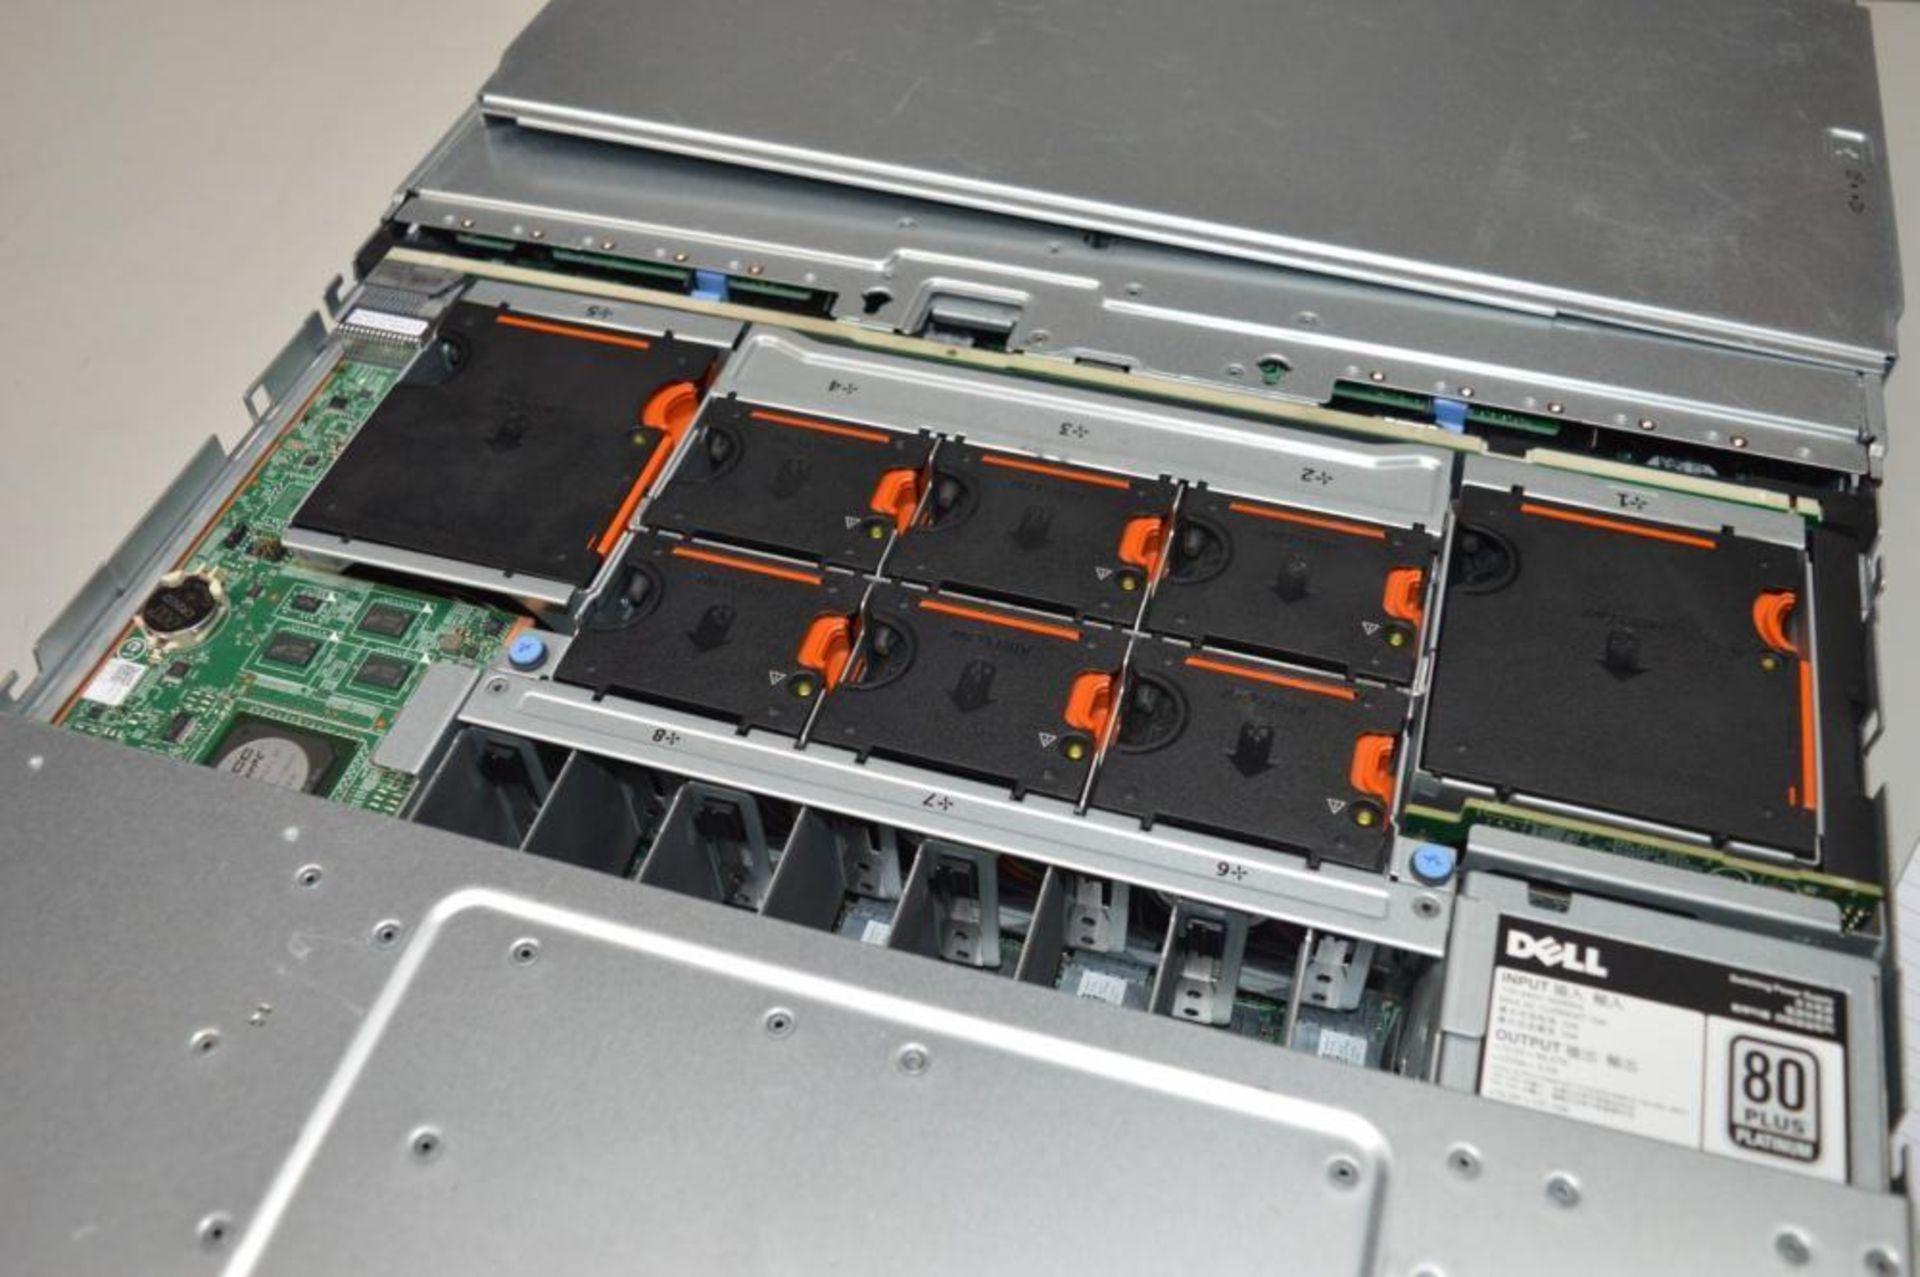 1 x Dell Power Edge FX2S Enclosure With Two Poweredge FC630 Blade Servers, 2 x Xeon E5-2695V3 14 Cor - Image 2 of 16